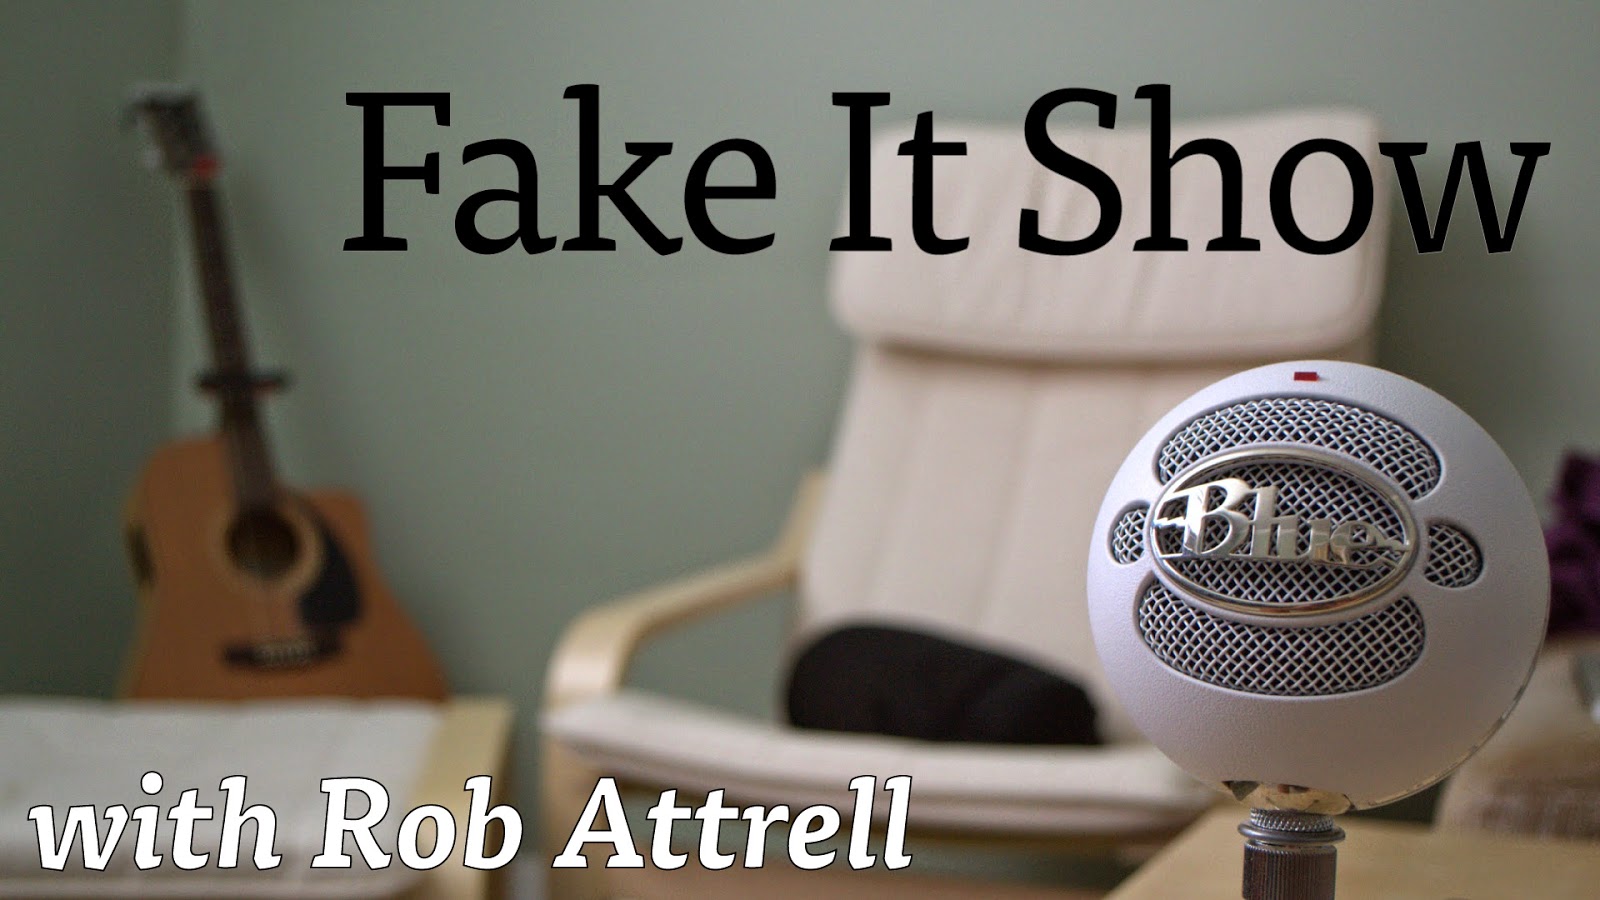 Fake It Show: Episode 3, with Brian Lee